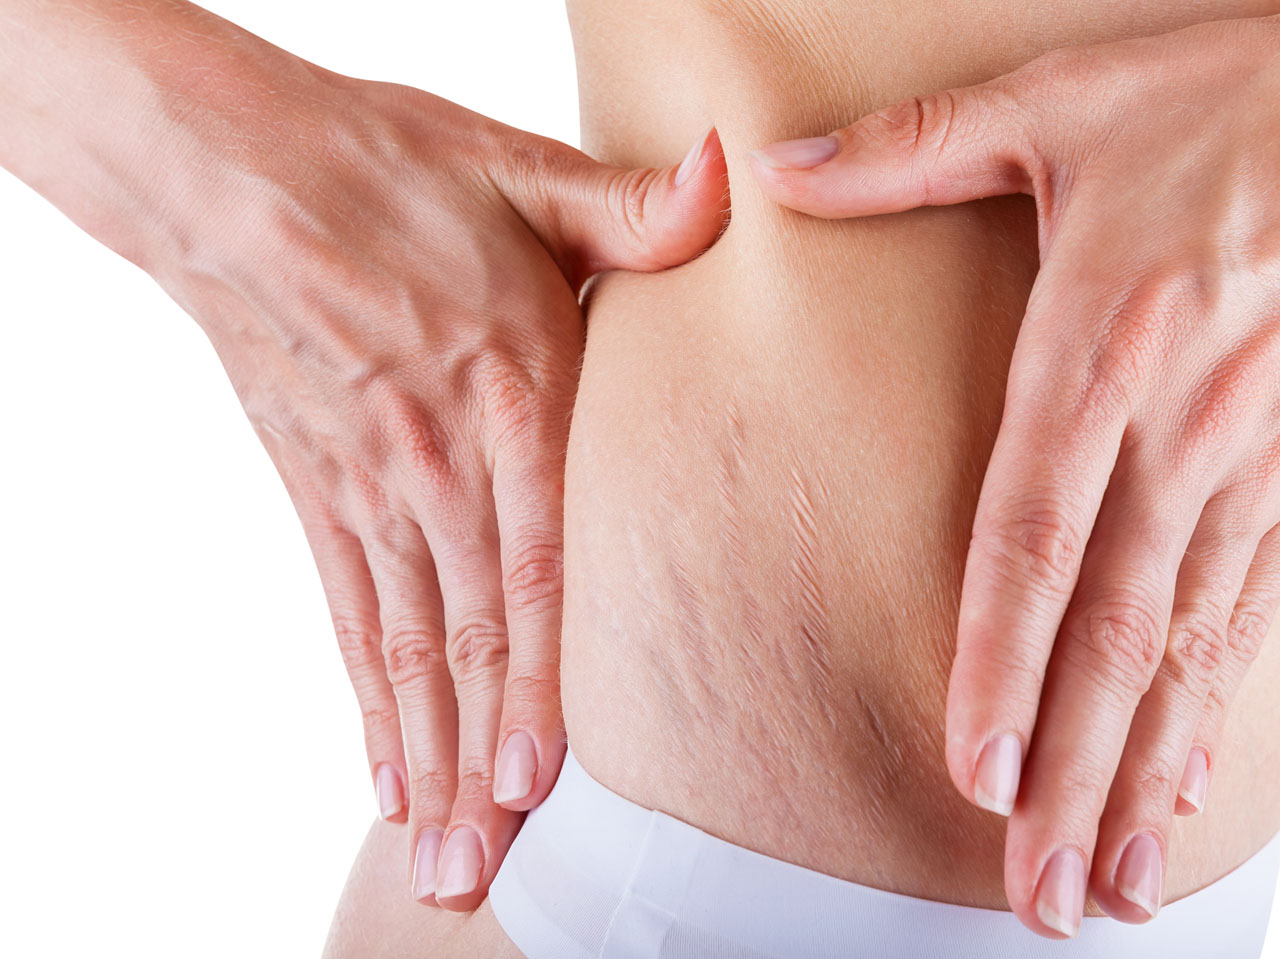 A woman showing her stretch marks on the hip